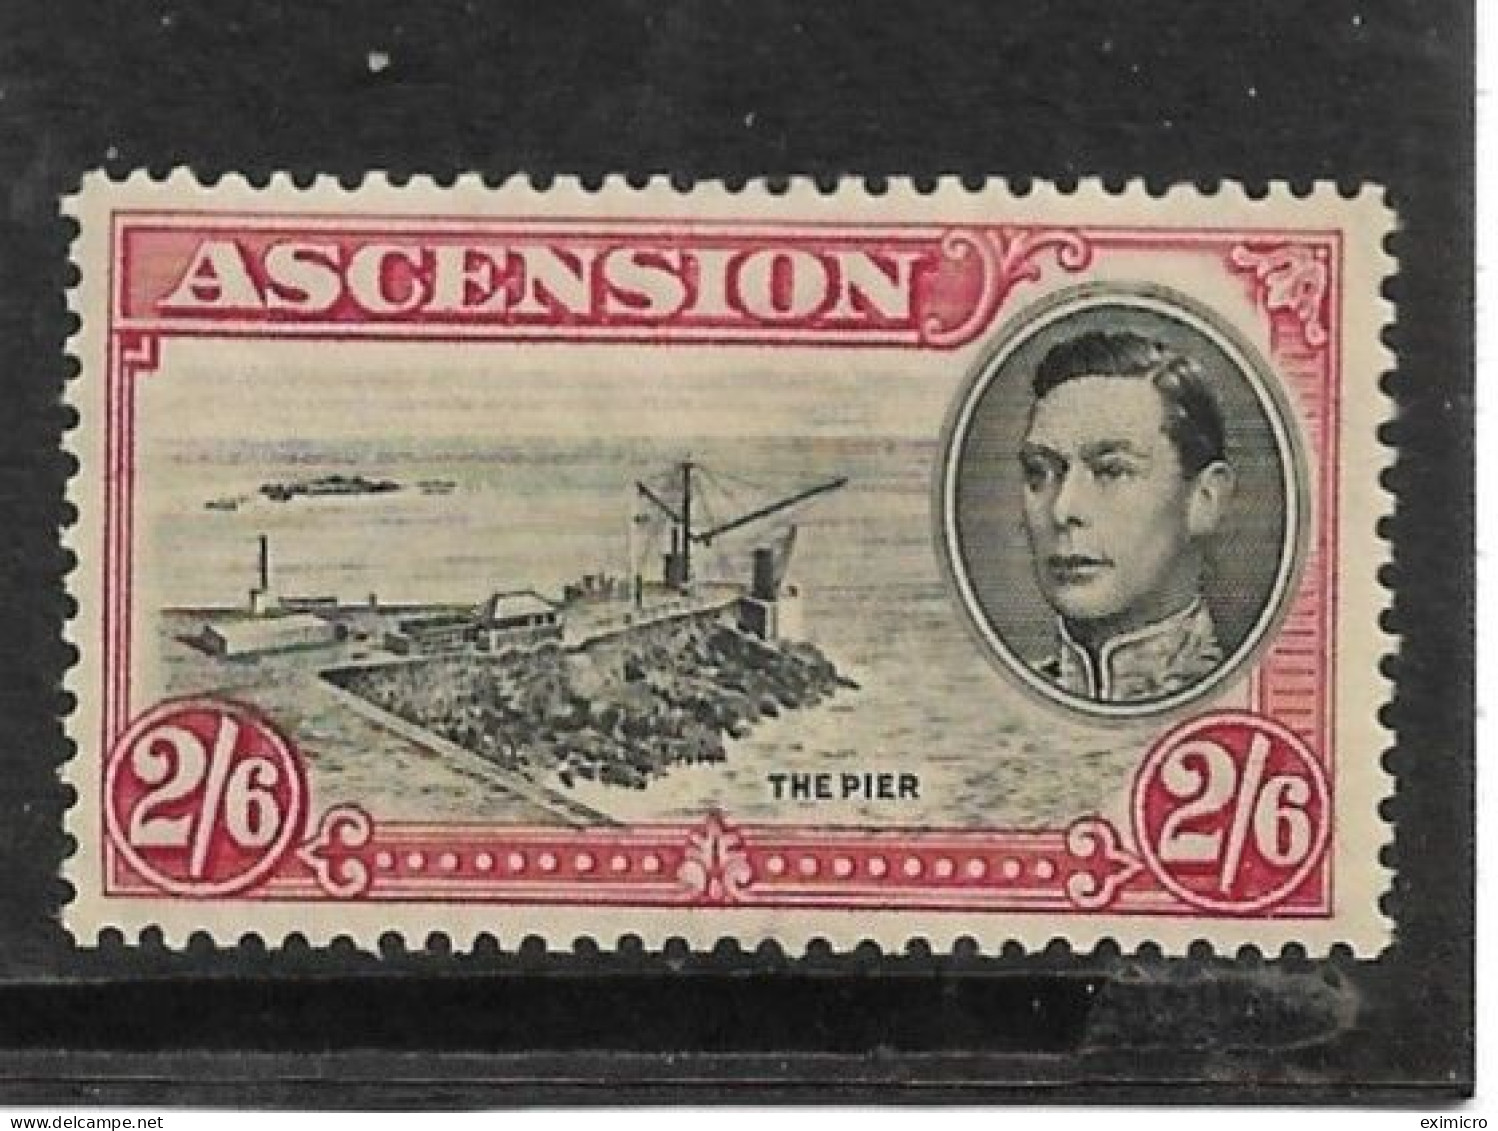 ASCENSION 1938 2s 6d SG 45 PERF 13½ UNMOUNTED MINT Cat £45 - Ascension